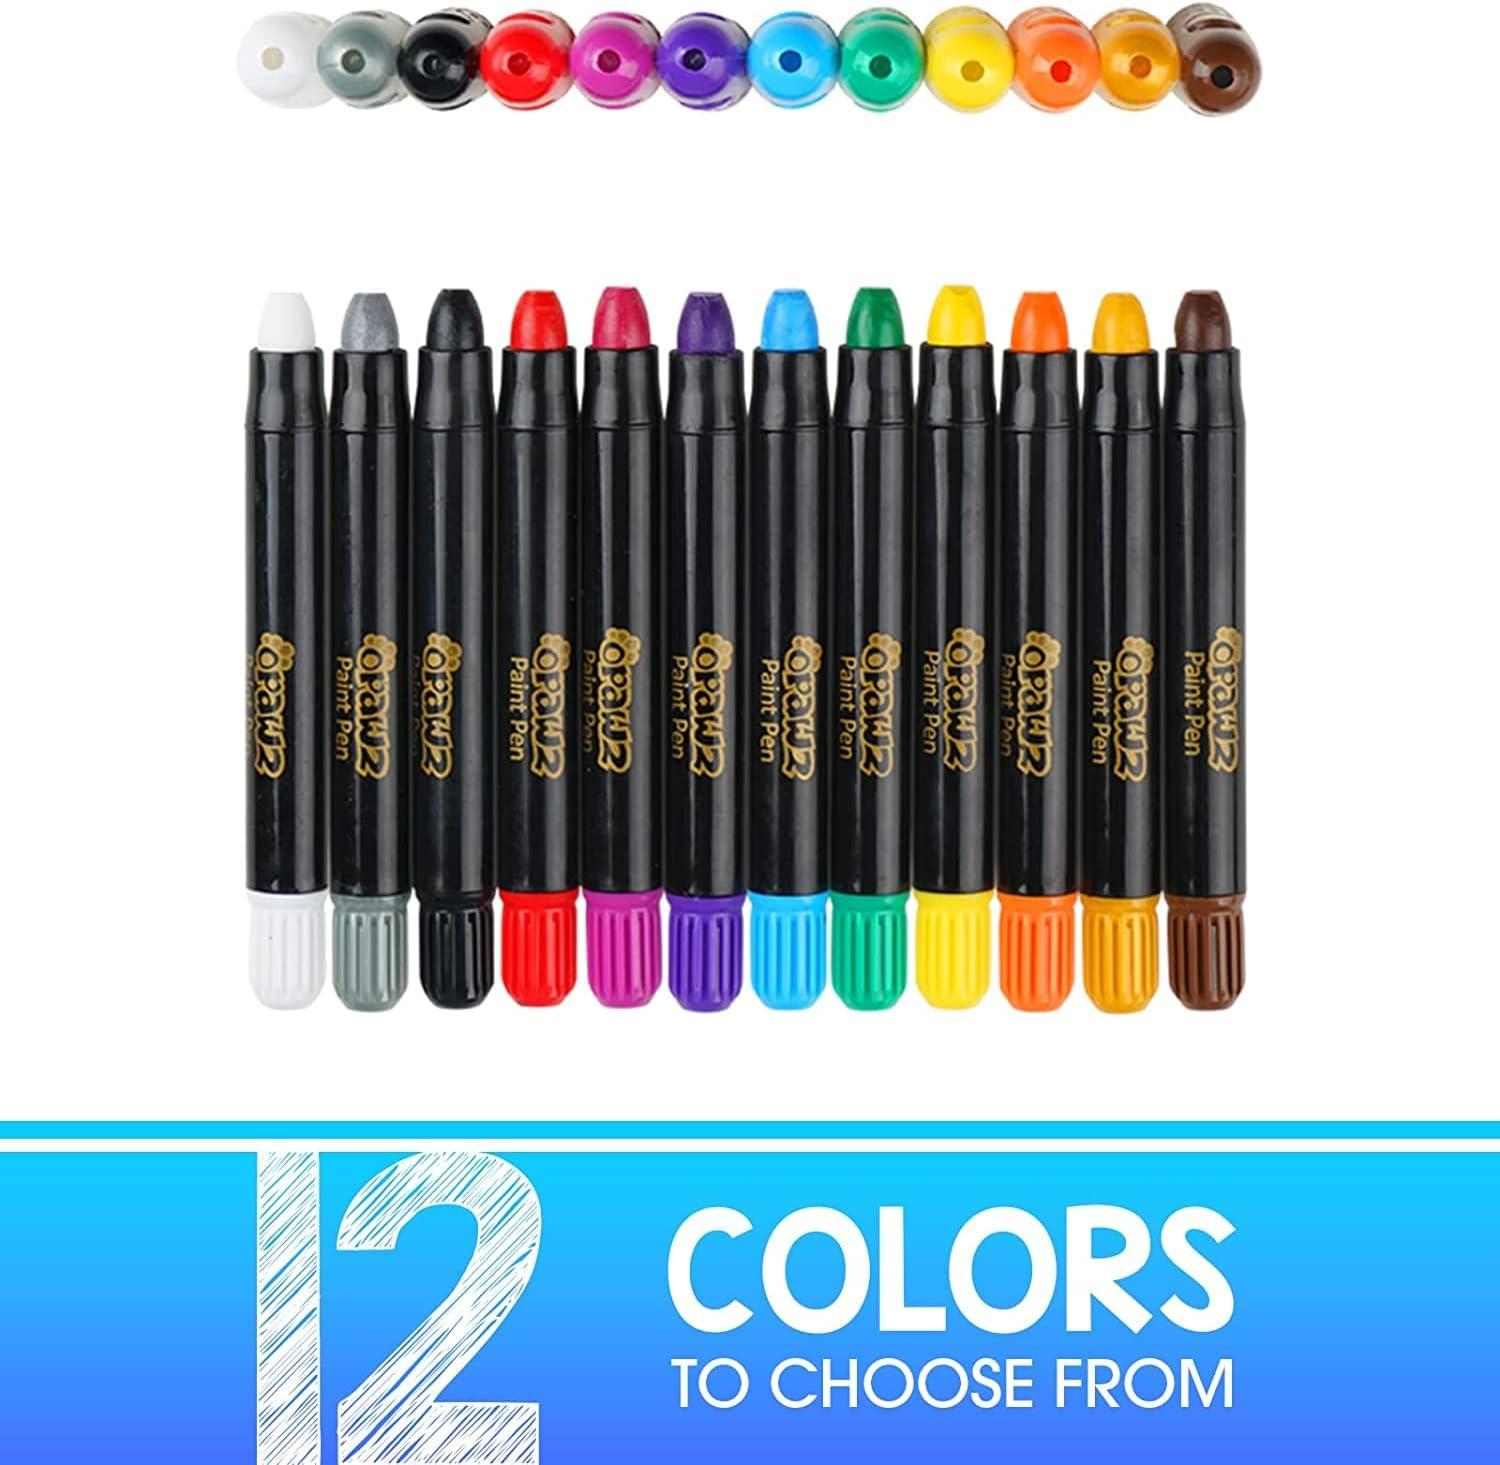 OPAWZ 12pcs Paint Pens for Temporary Dog Hair Dye, Non-Toxic Dog Safe Color  Paint Dye, Washable Pet Hair Dye, Hair Color Crayon, Grooming Accessories  Kit Marking Paint for Dogs, Cats, Birds and